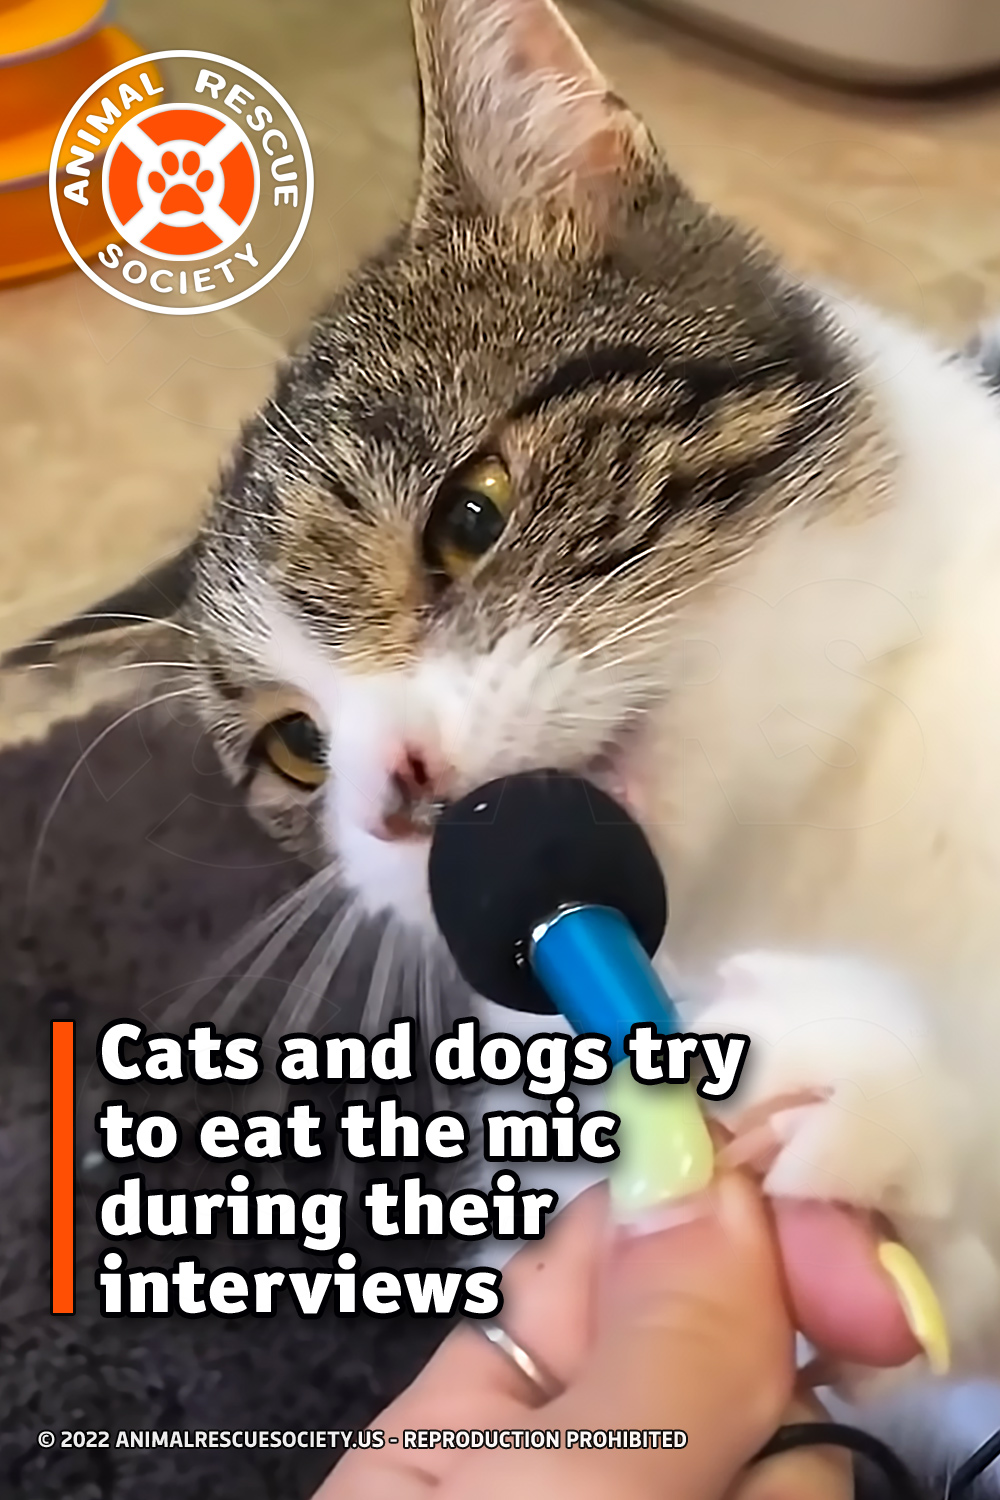 Cats and dogs try to eat the mic during their interviews